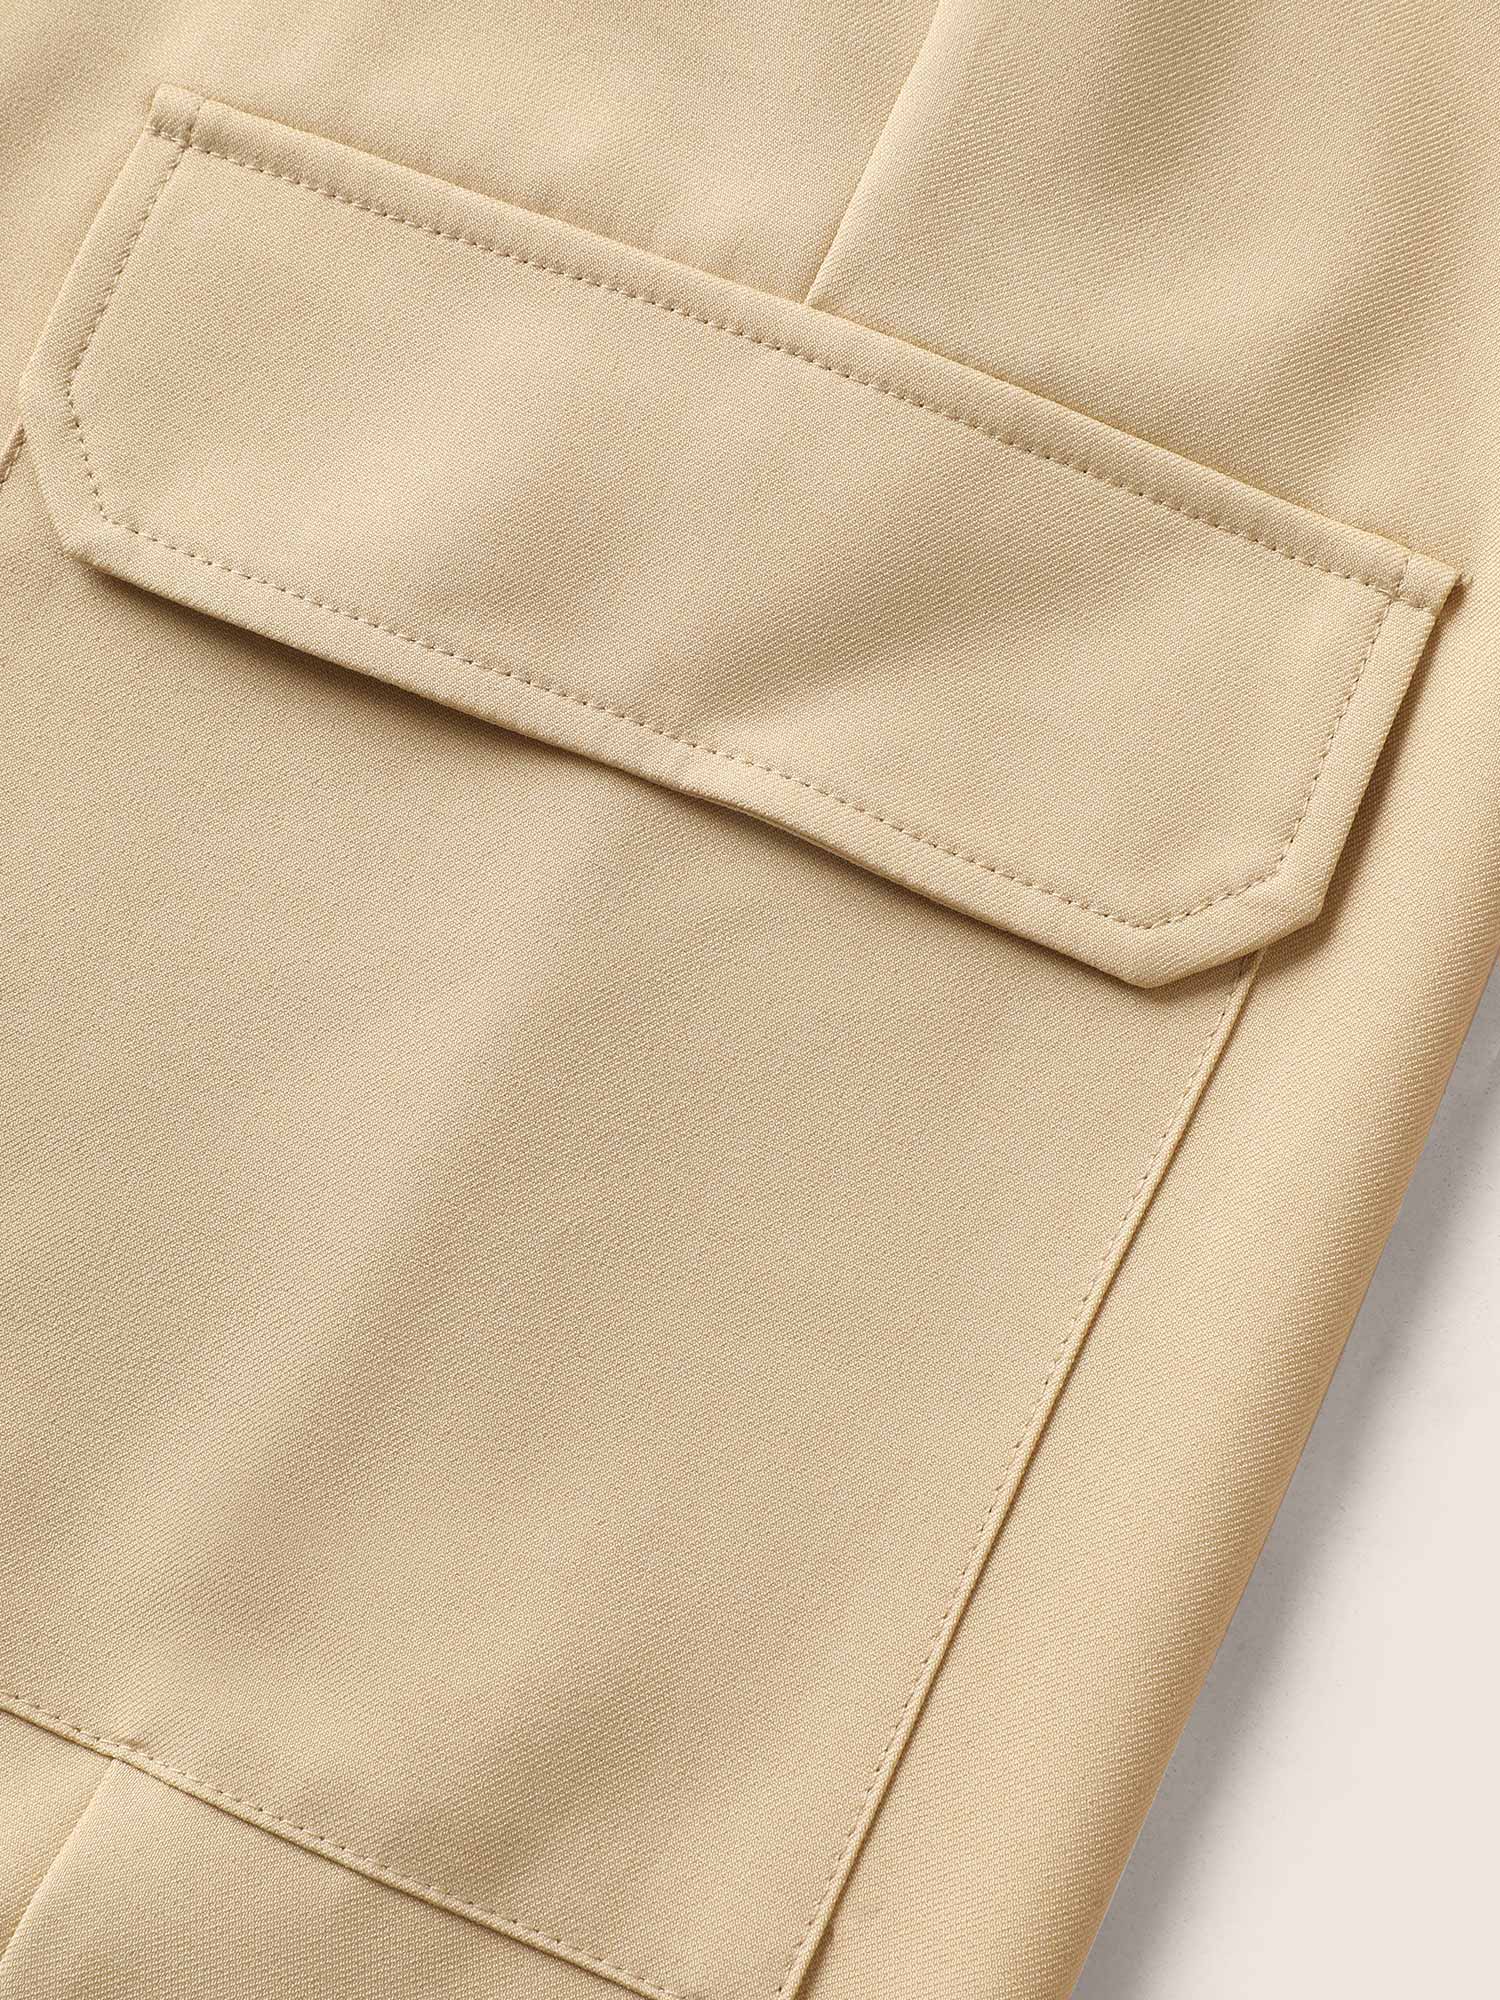 

Plus Size Patched Pocket Elastic Waist Tapered Pants Women Tan Casual Harem High Rise Everyday Pants BloomChic